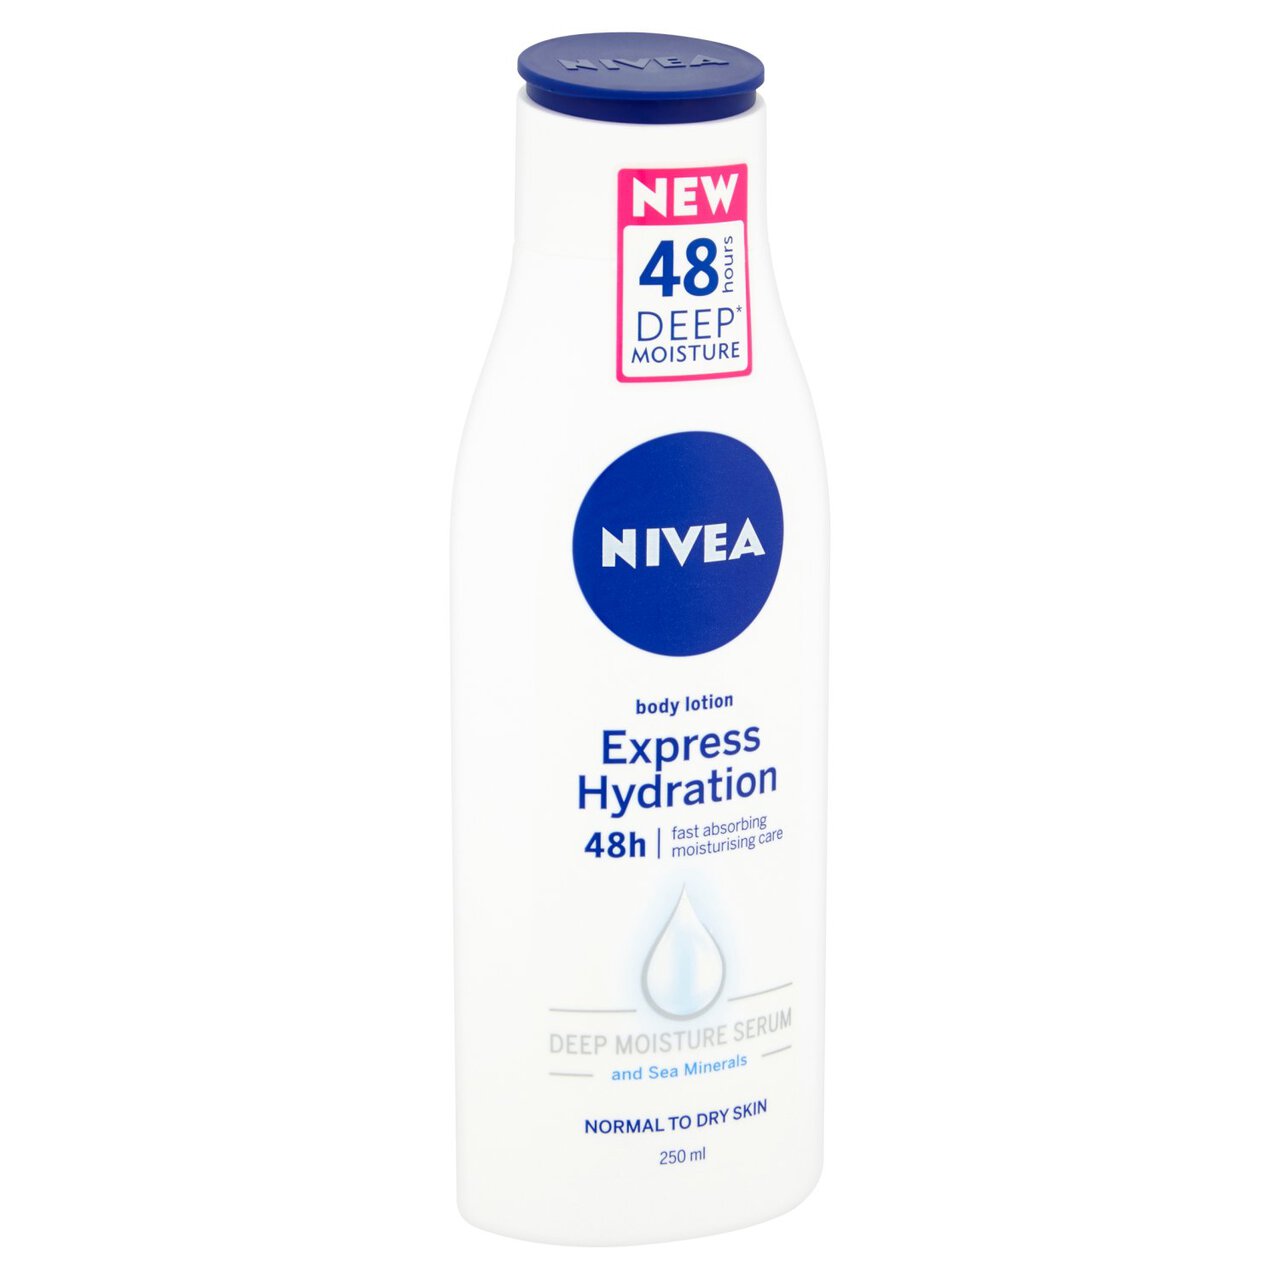 NIVEA Body Lotion for Normal Skin, Express Hydration 250ml